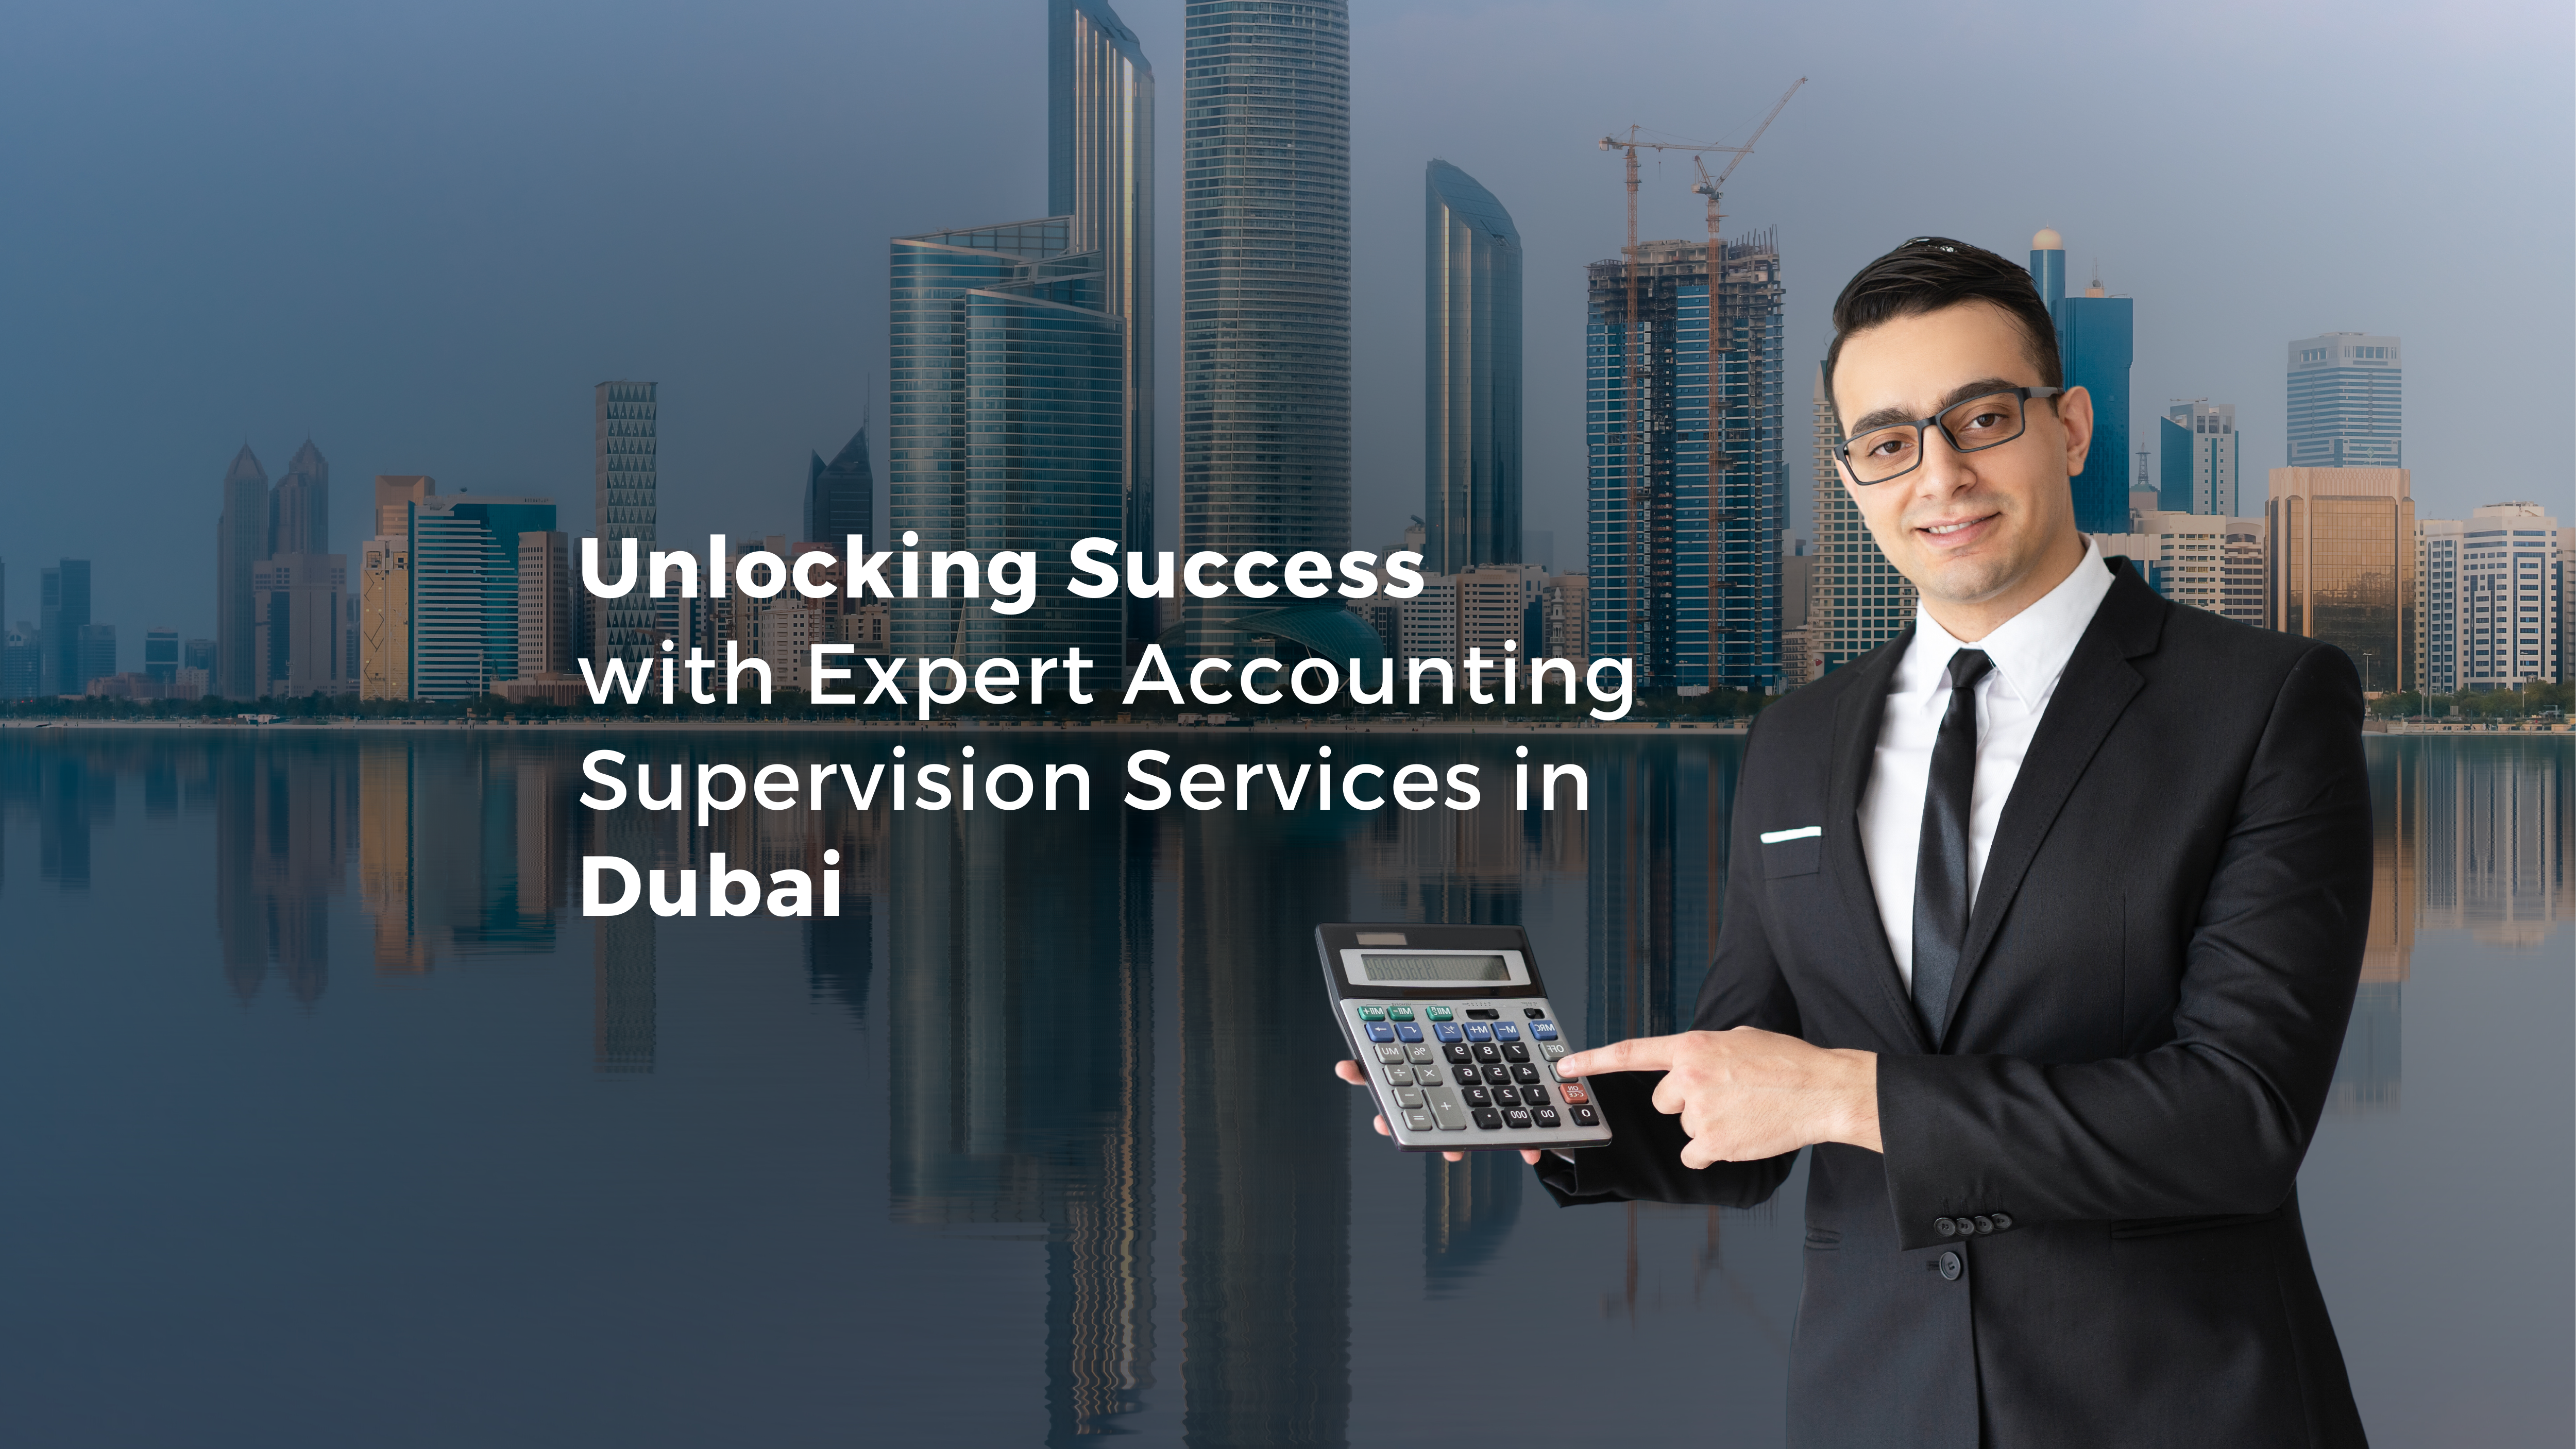 Unlocking Success with Expert Accounting Supervision Services in Dubai